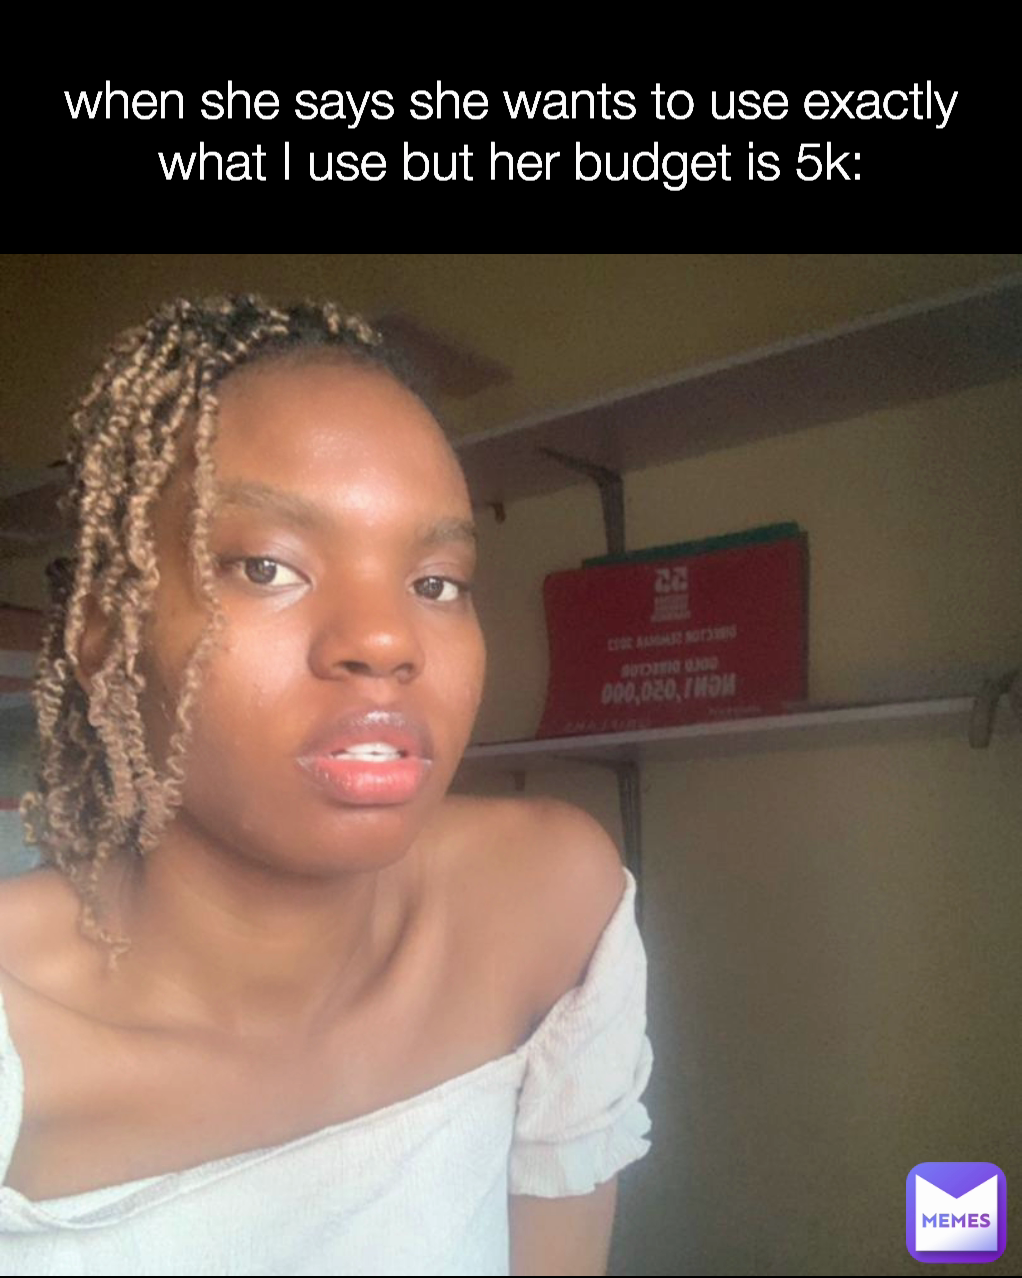 when she says she wants to use exactly what I use but her budget is 5k ...